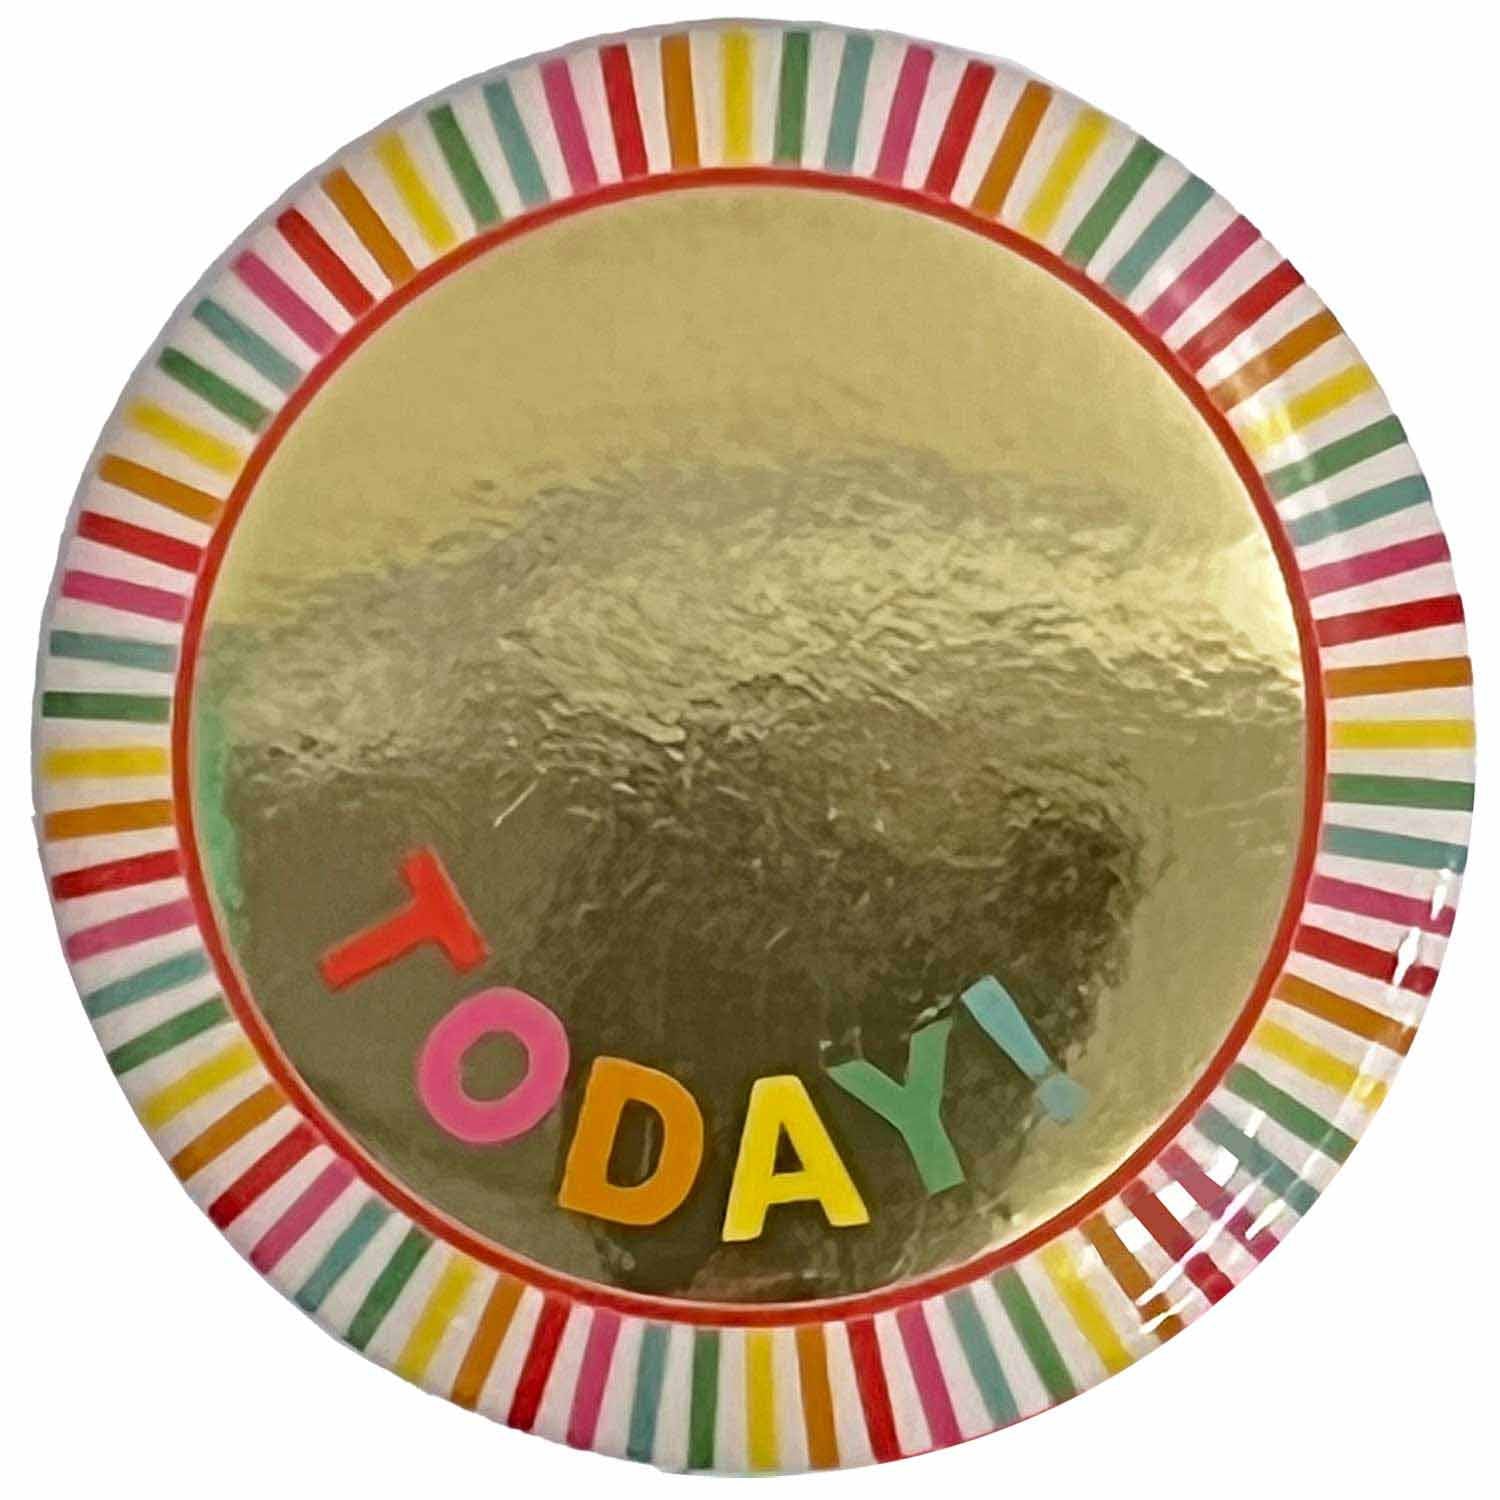 Add-an-Age Birthday Badge, 6cm. Comes with stick on numbers